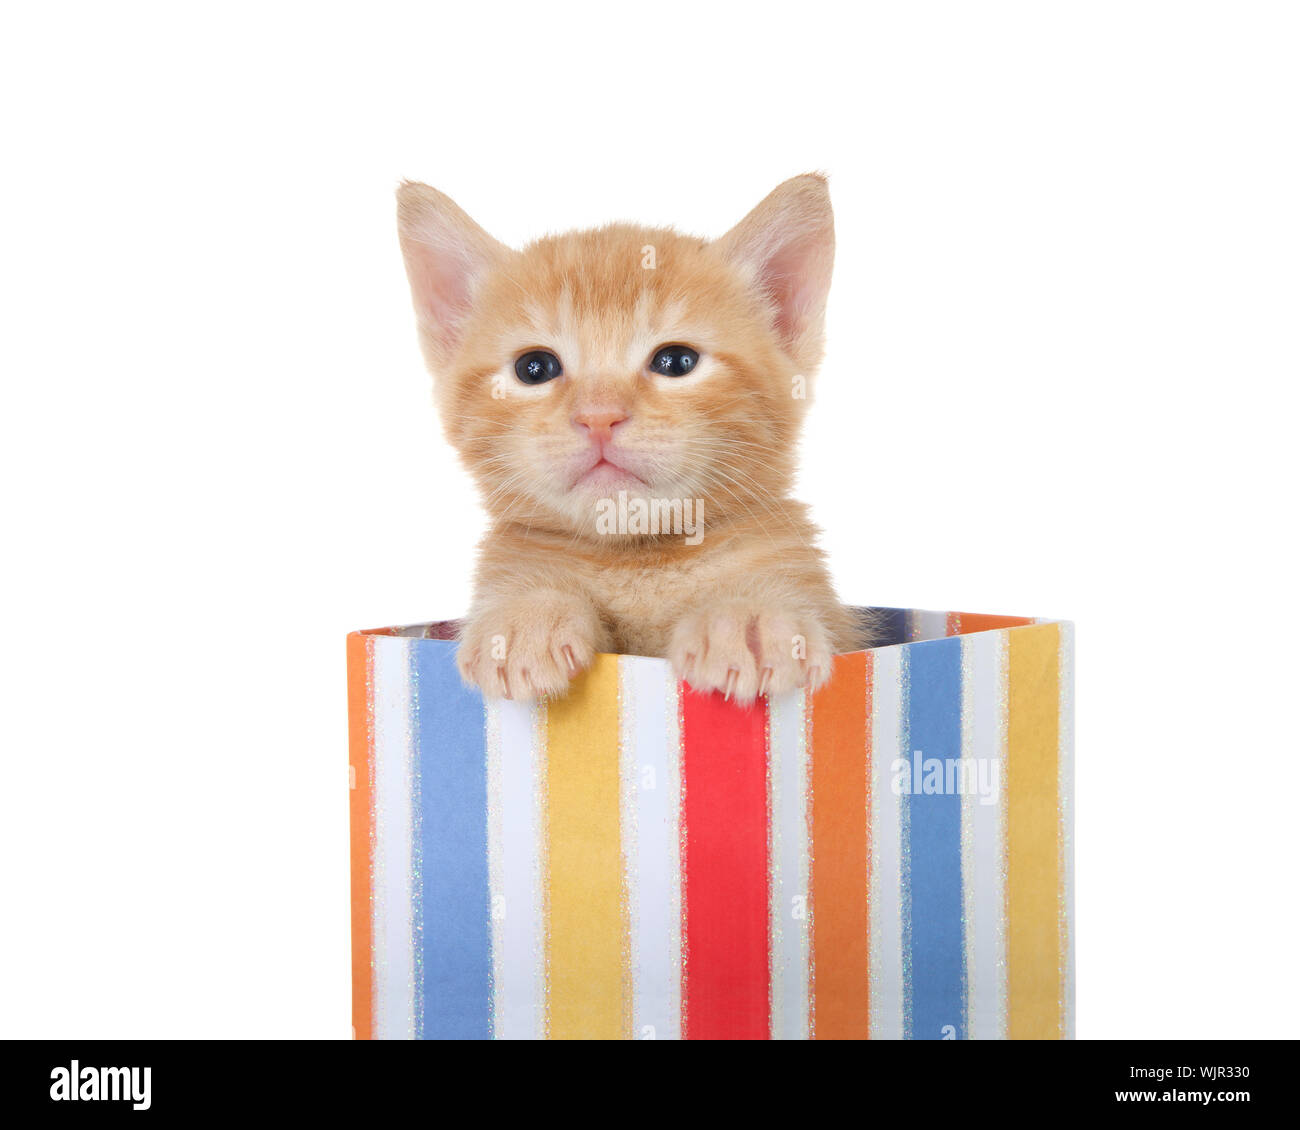 Adorable tiny orange ginger tabby kitten peaking out of a colorful striped present box isolated on white background. Fun comical animal antics. Stock Photo